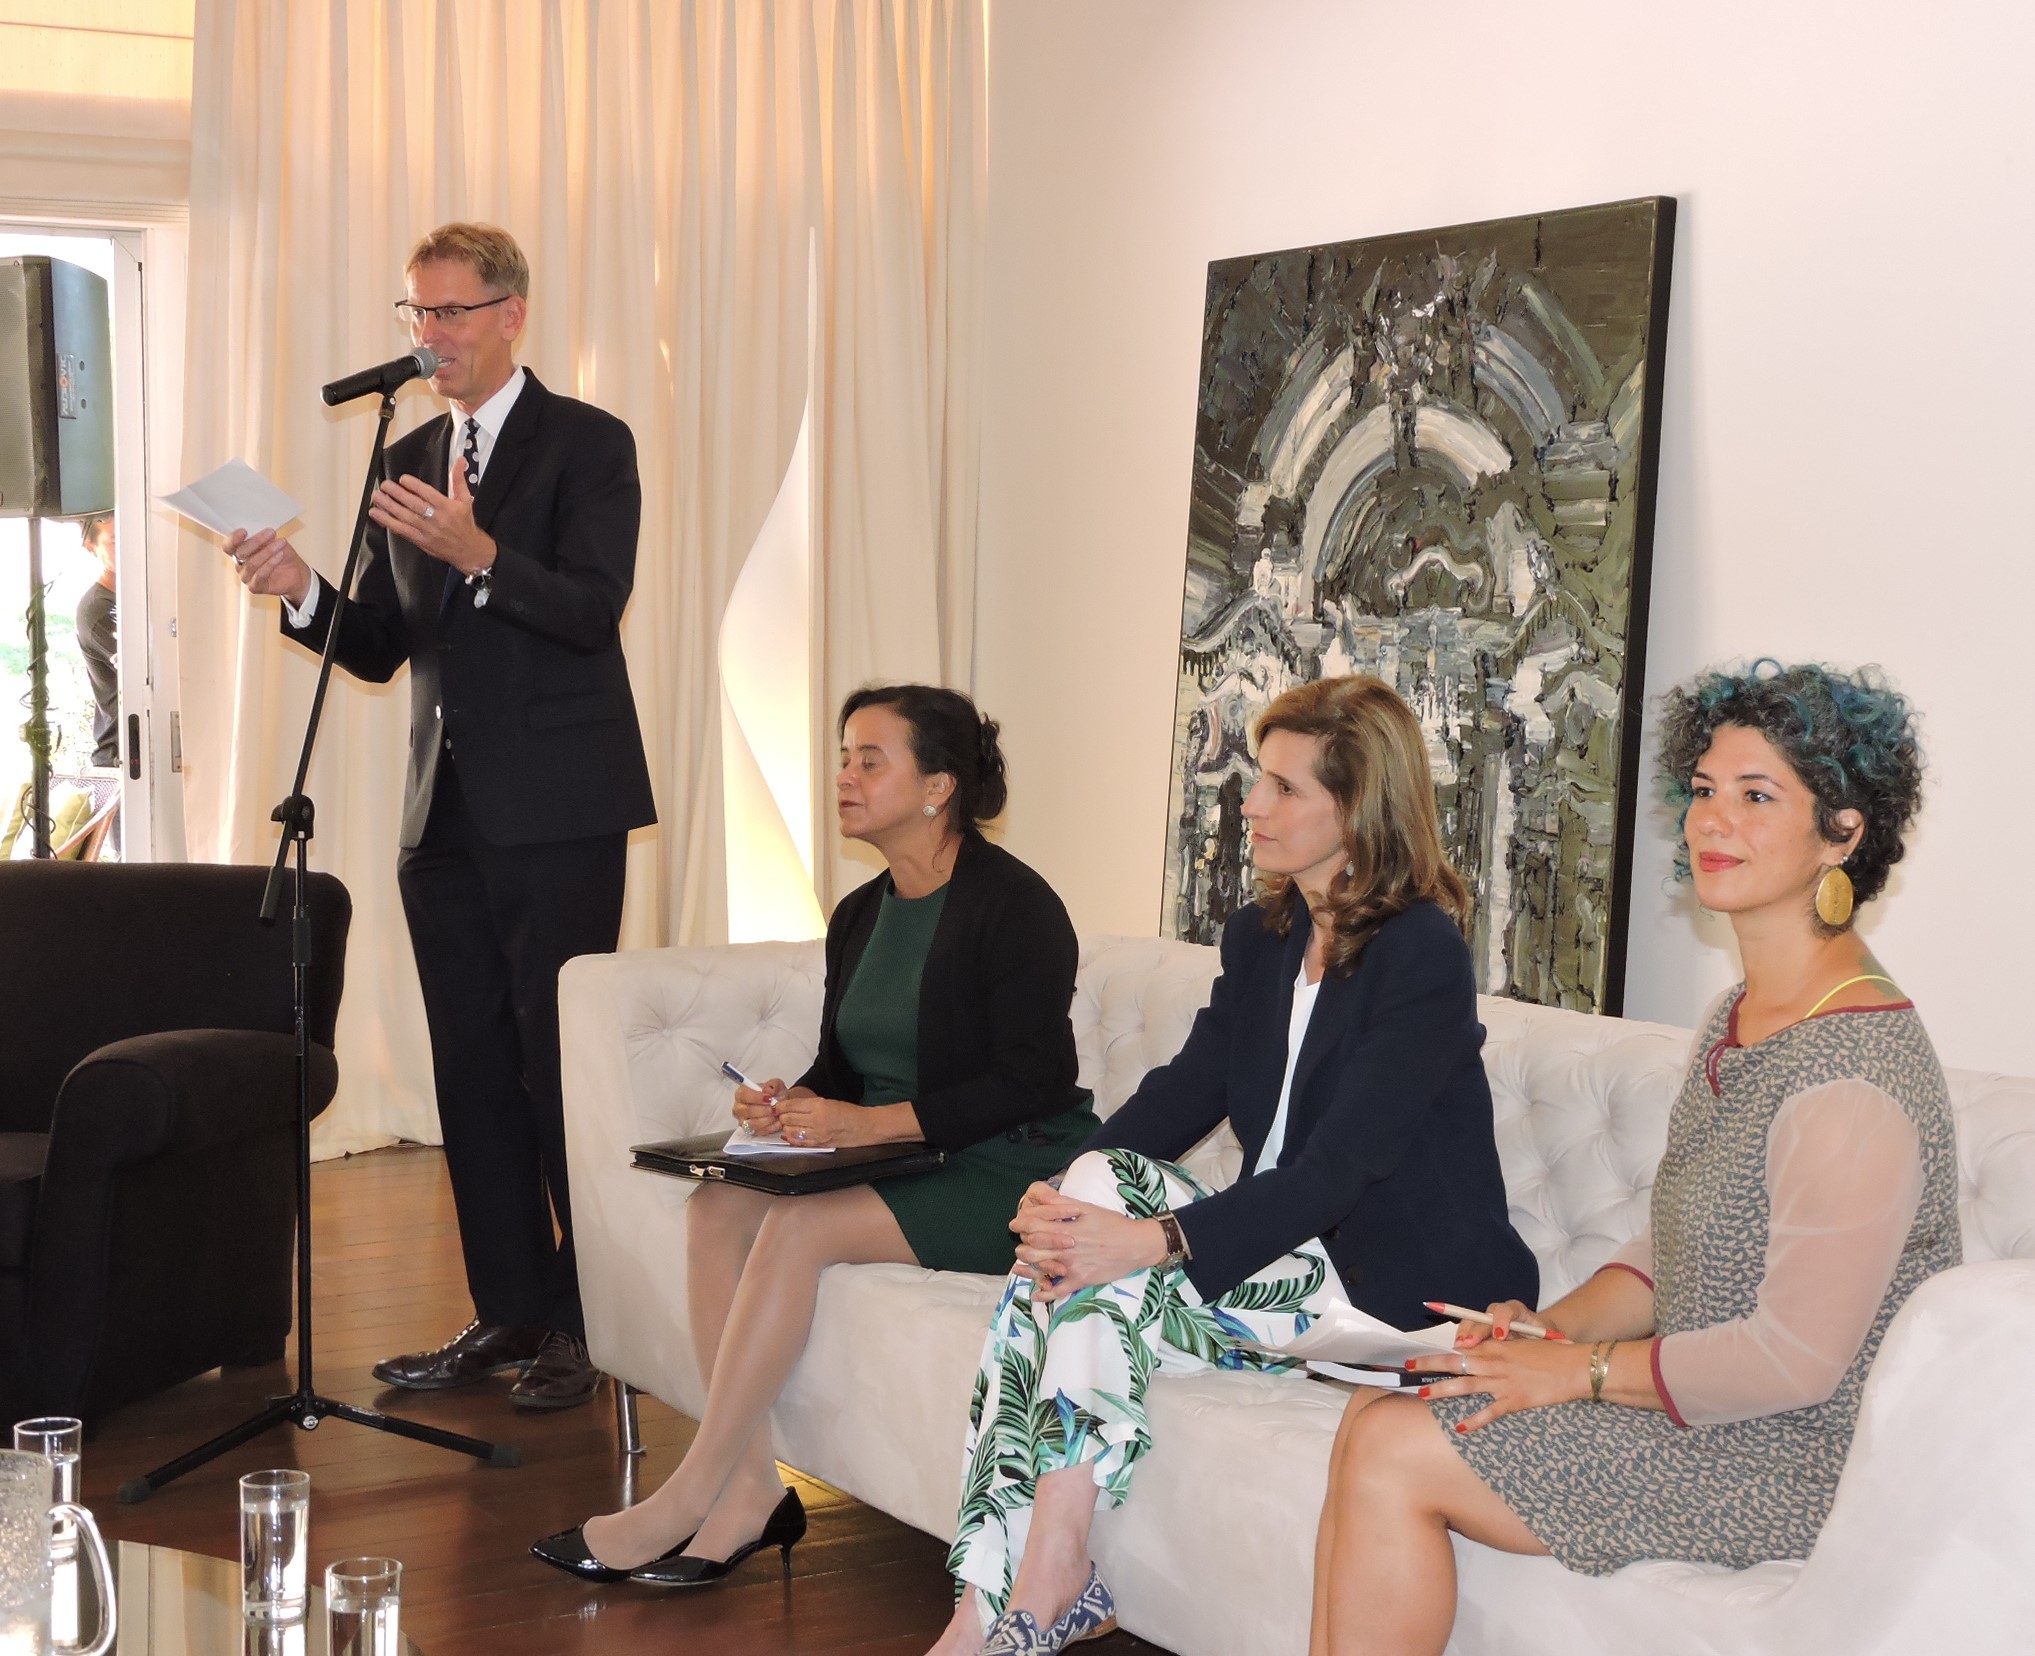 The host, Ambassador Jozef Smets opened the debate directed by Princess Maria- Emeralda . (In the middle.